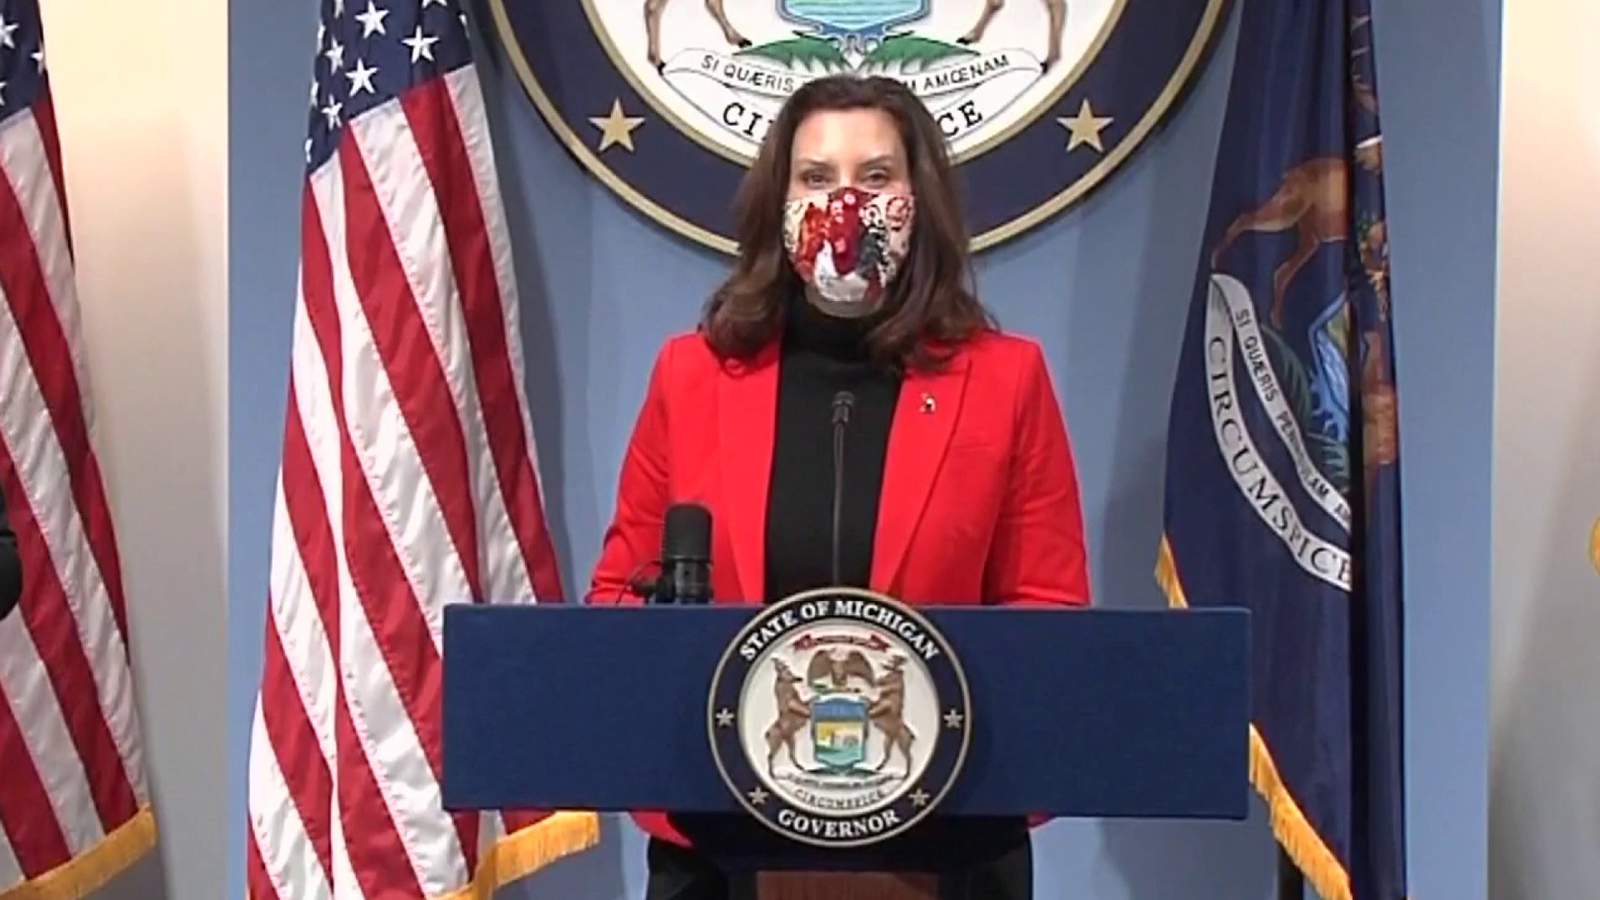 Gov. Whitmer says Michigan’s tighter restrictions are reason for improved COVID situation